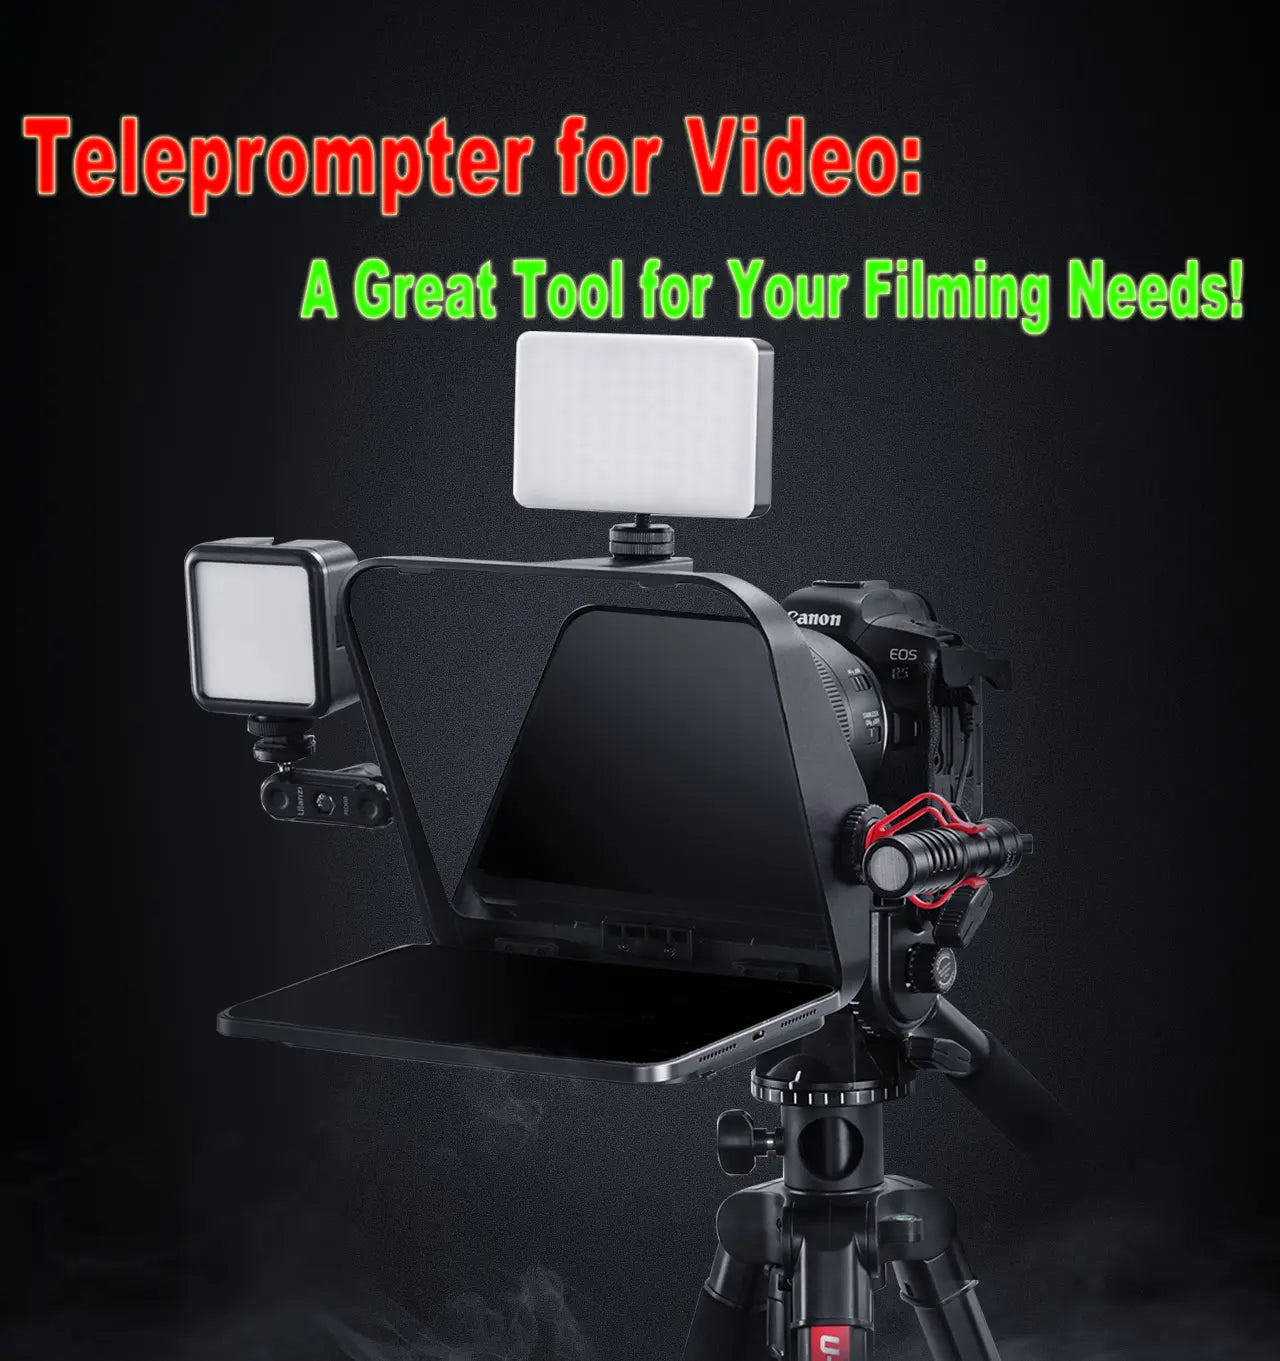 Teleprompter for Video: A Great Tool for Your Filming Needs!